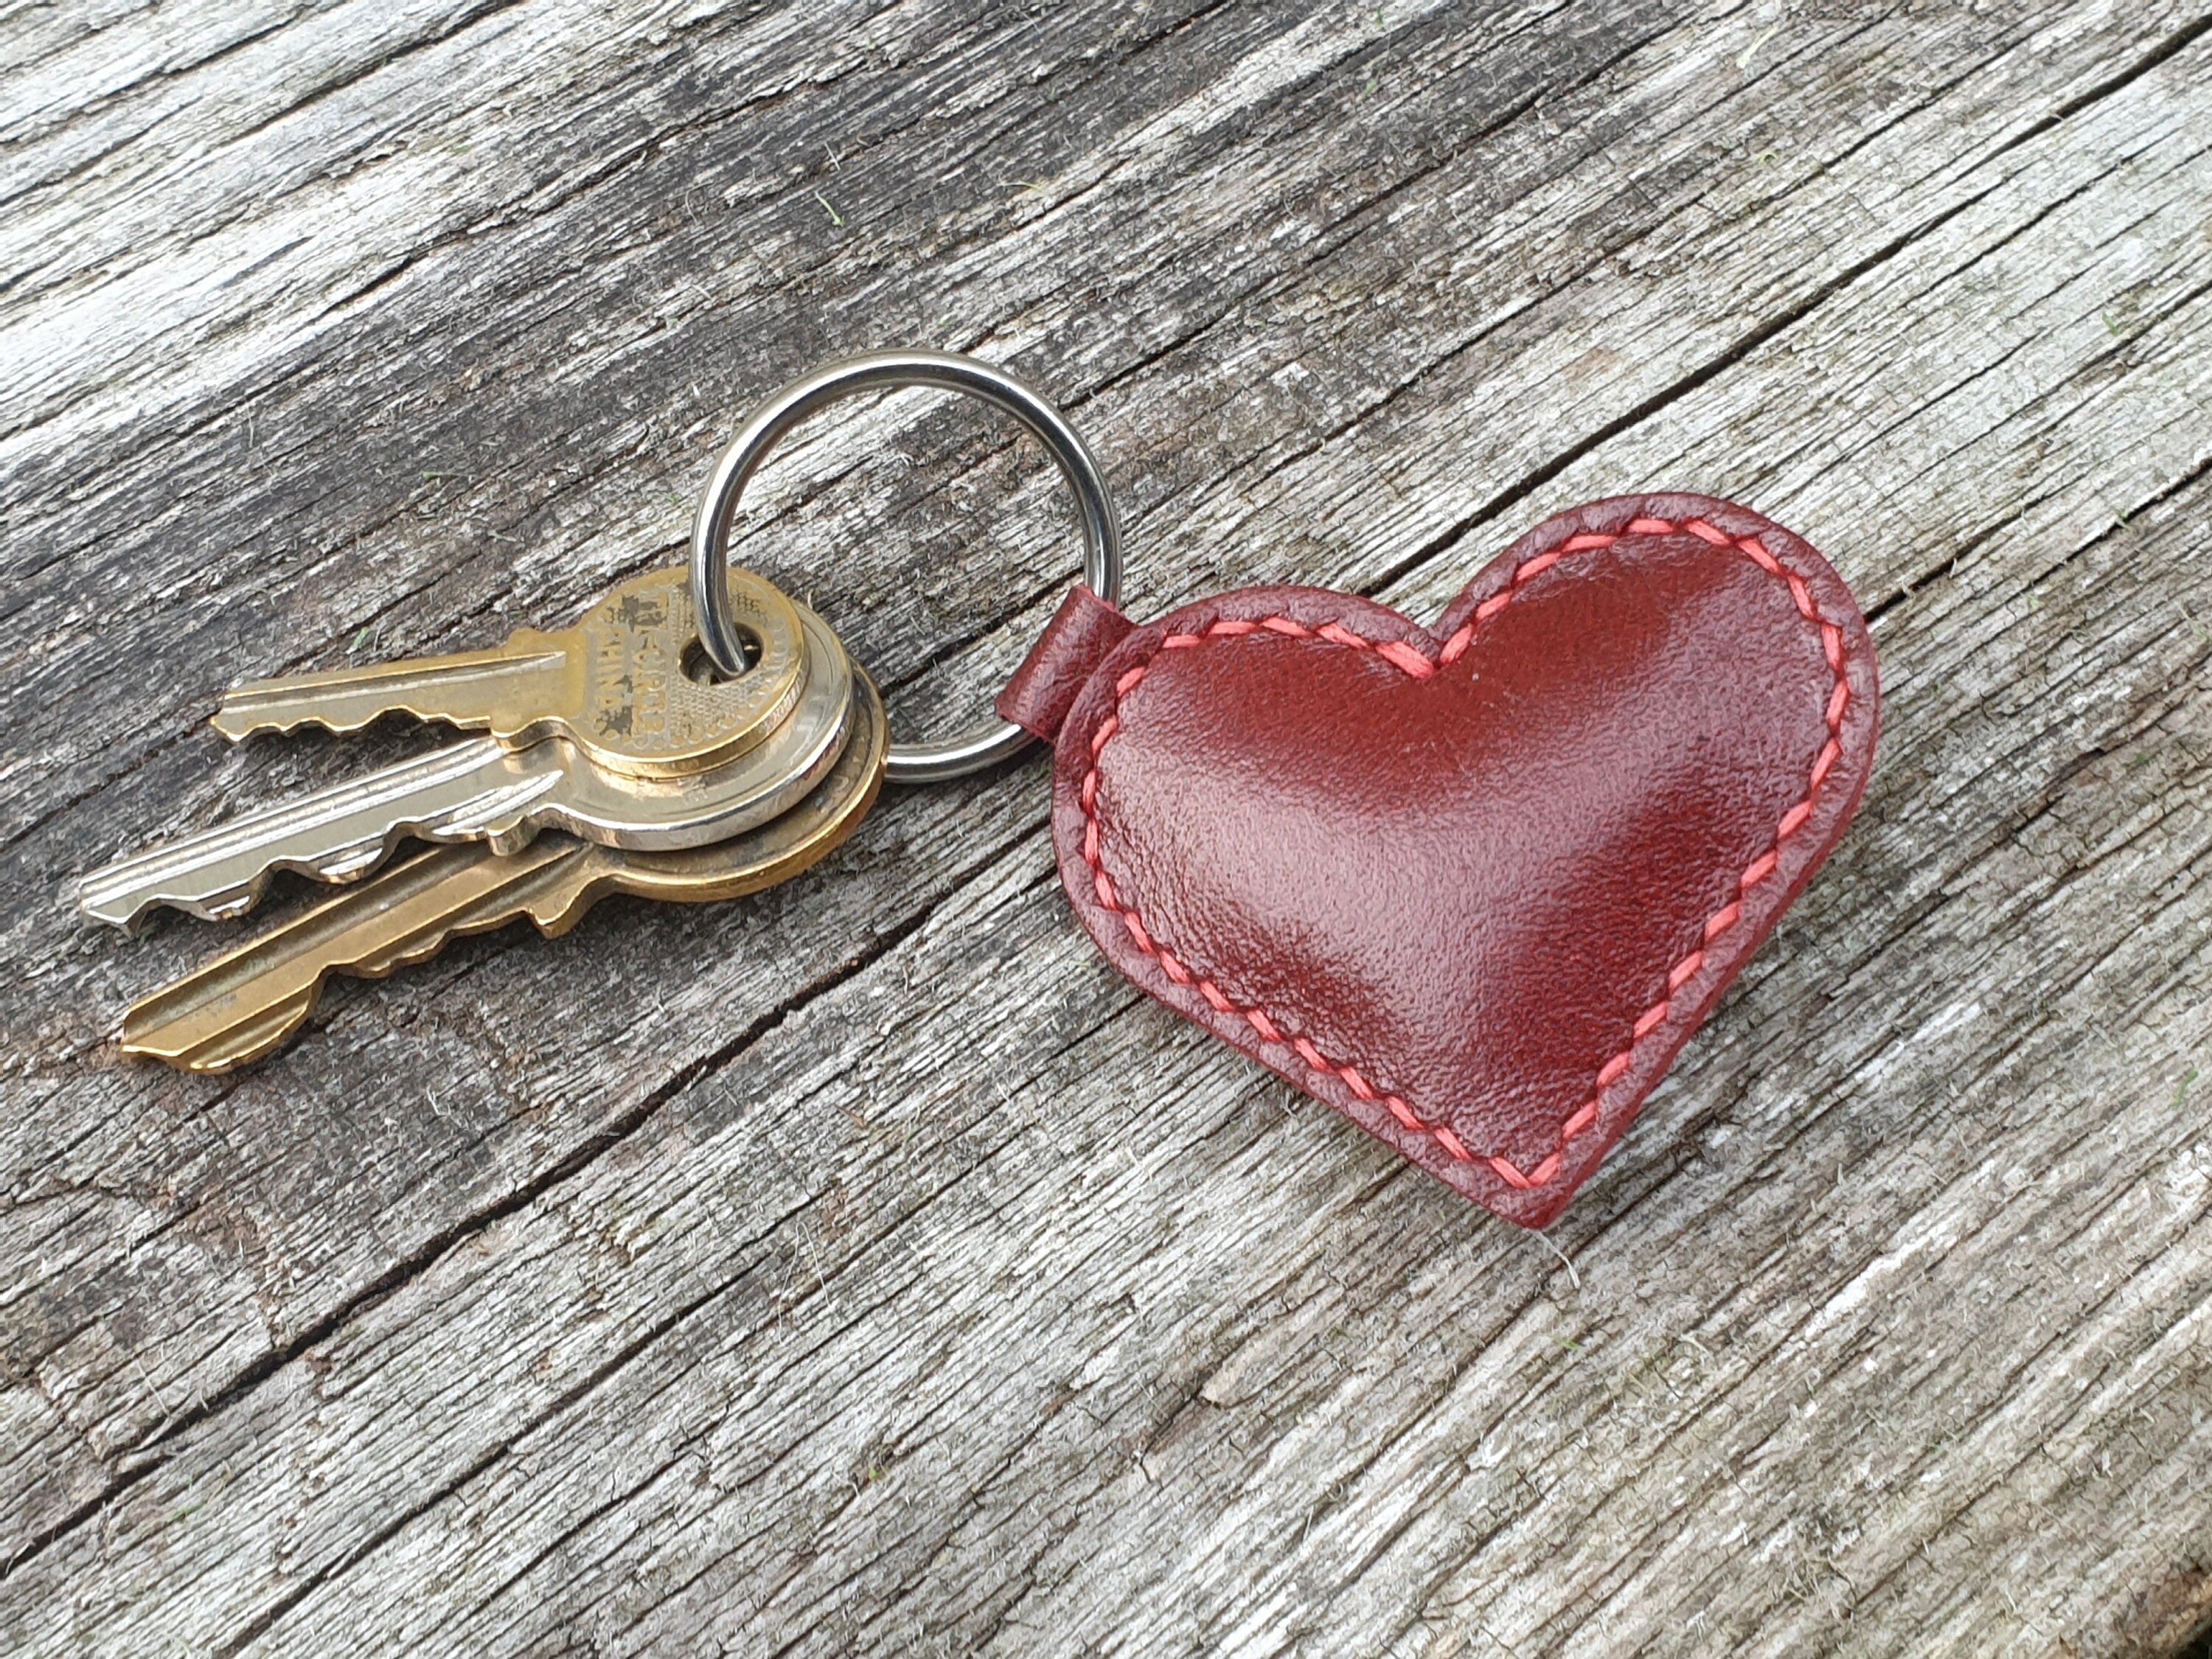 Unique DIY Leather Heart Shape Key Chain Kit Gift for Lover Black&Red